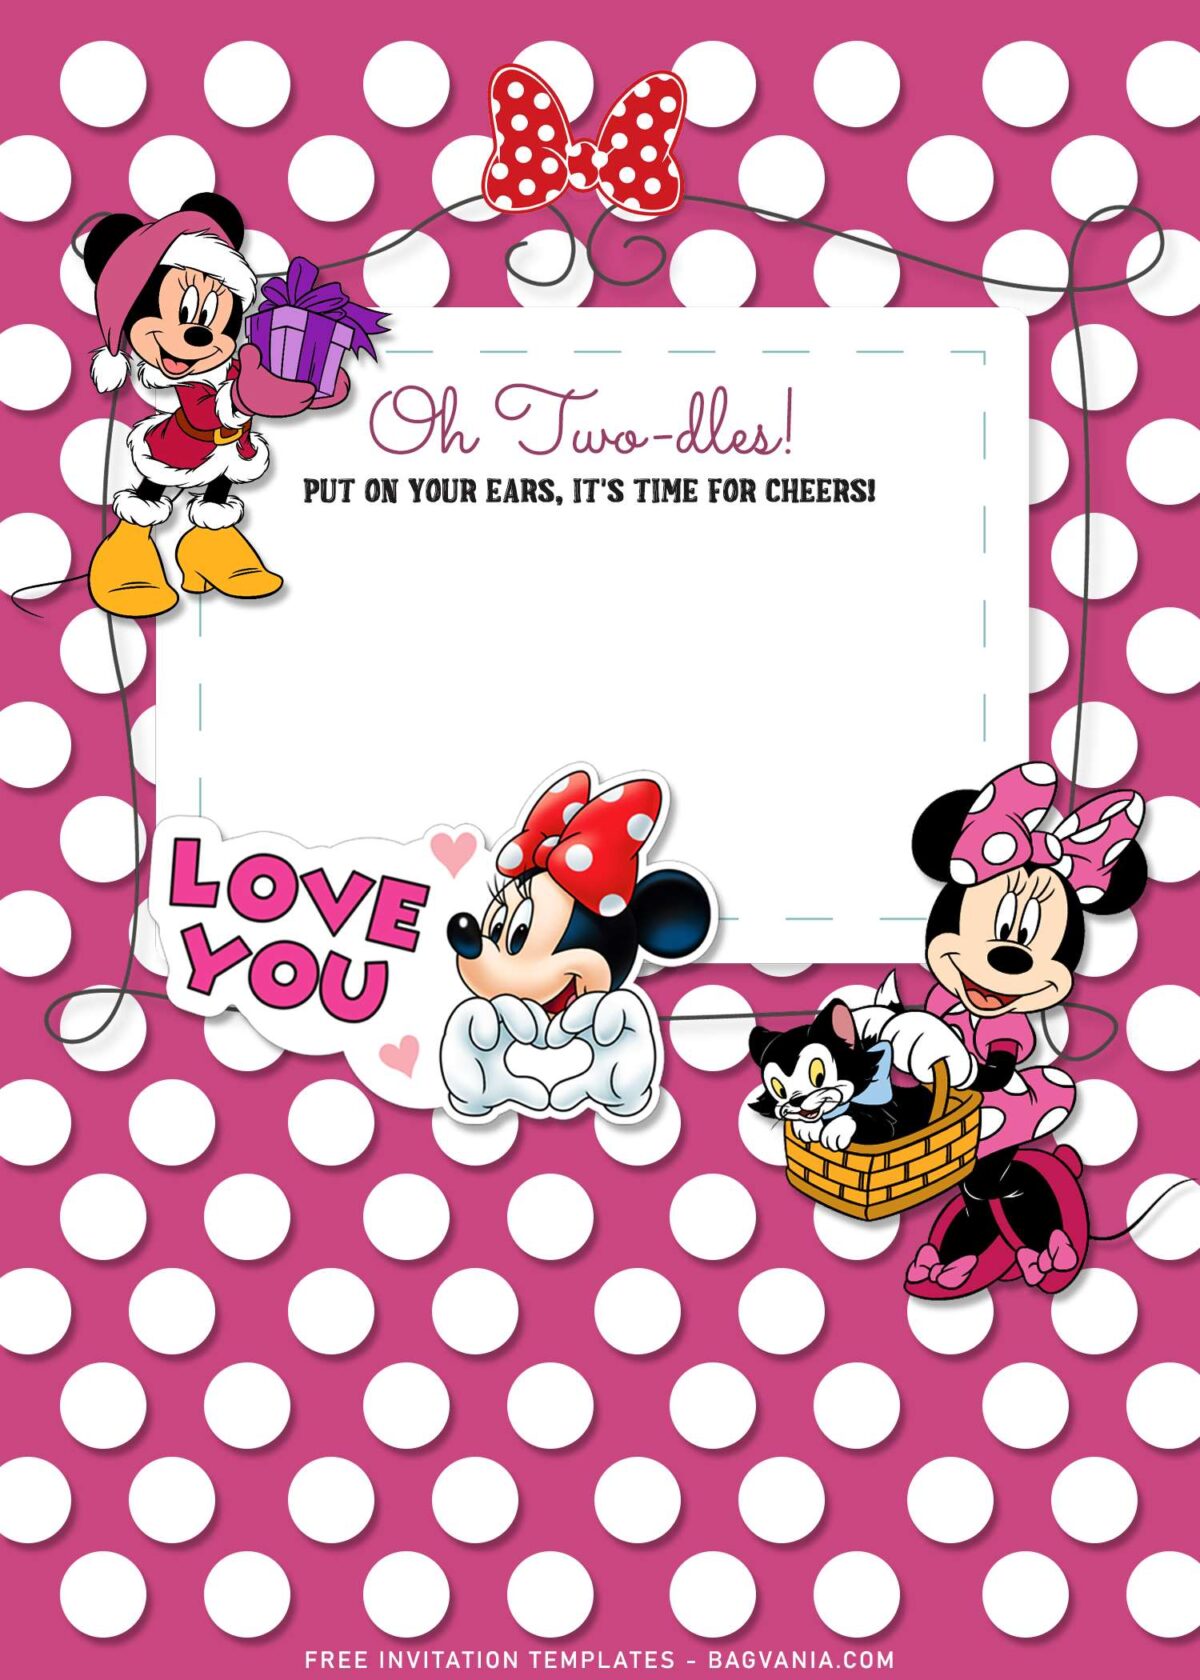 7+ Minnie Mouse Birthday Invitation Templates For Girls Birthday Of All Ages with cute Minnie Mouse sticker